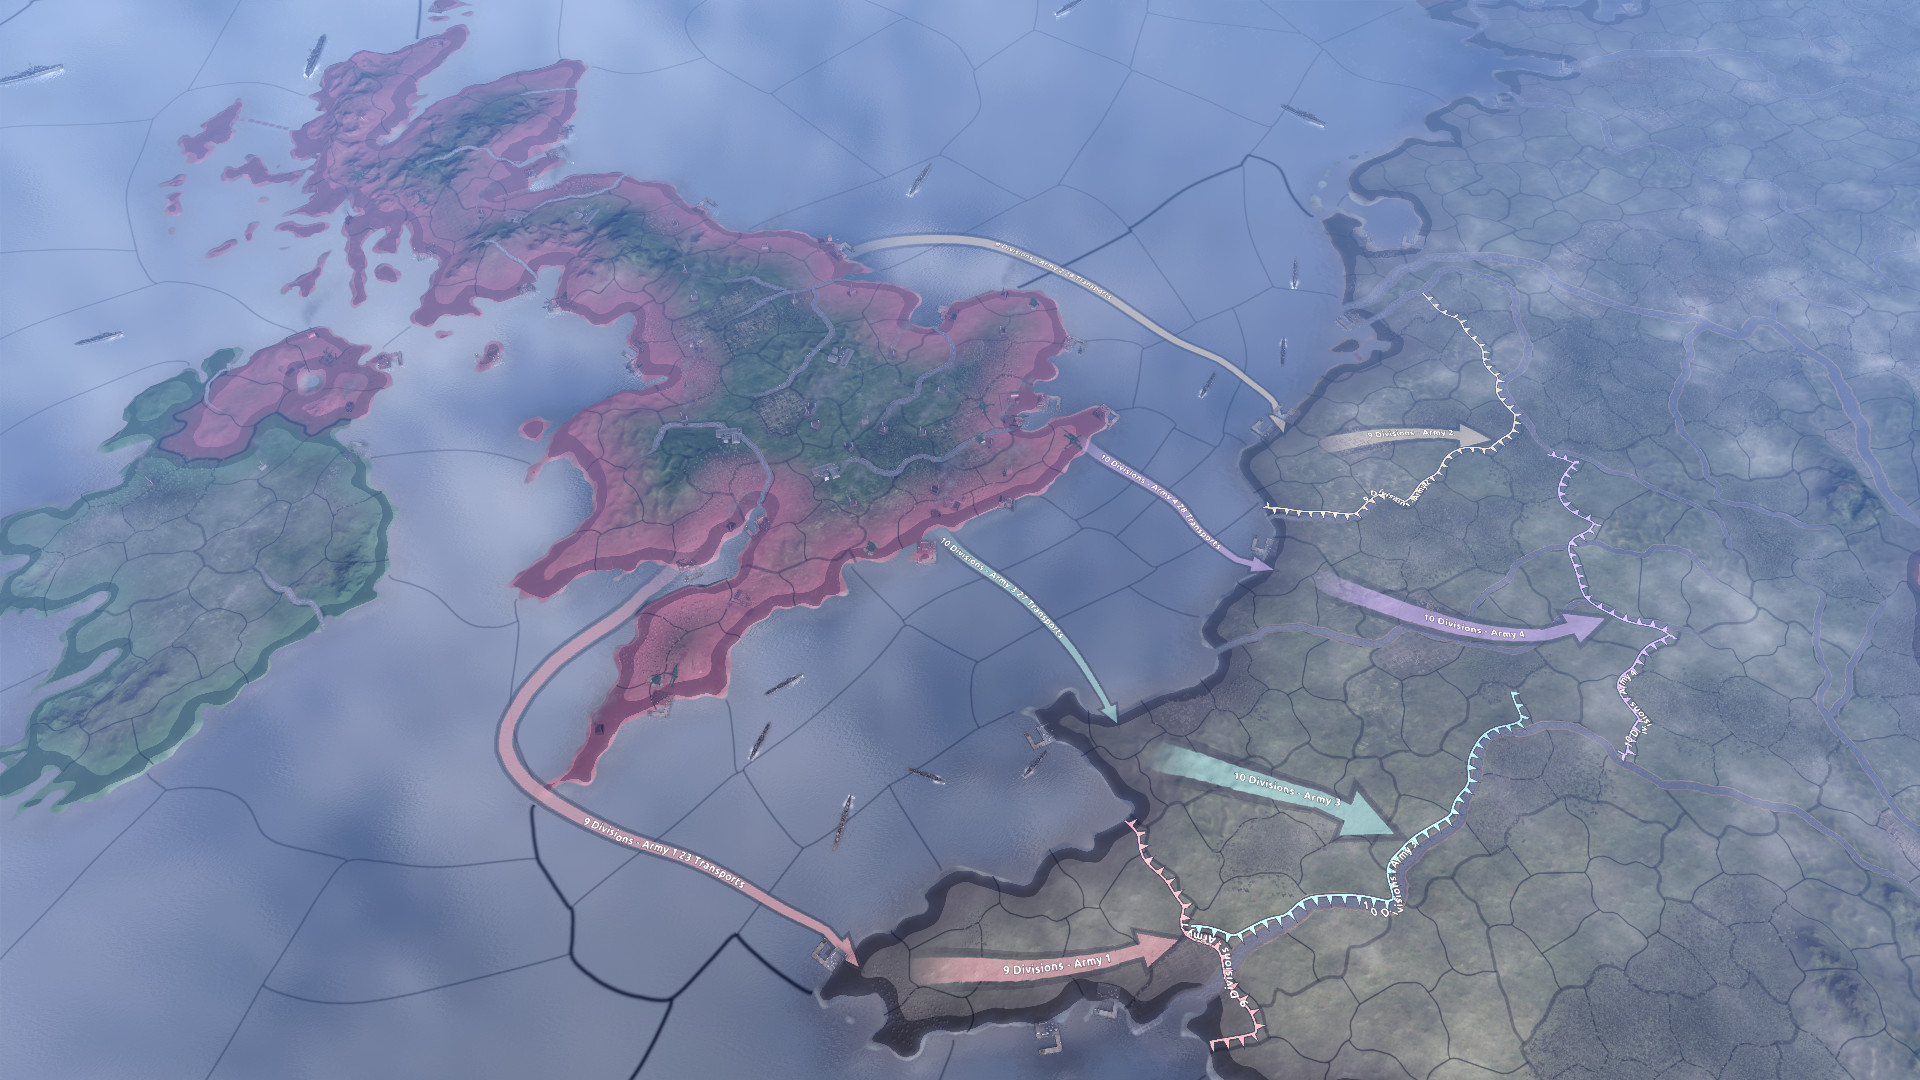 Hearts of Iron IV Free Download